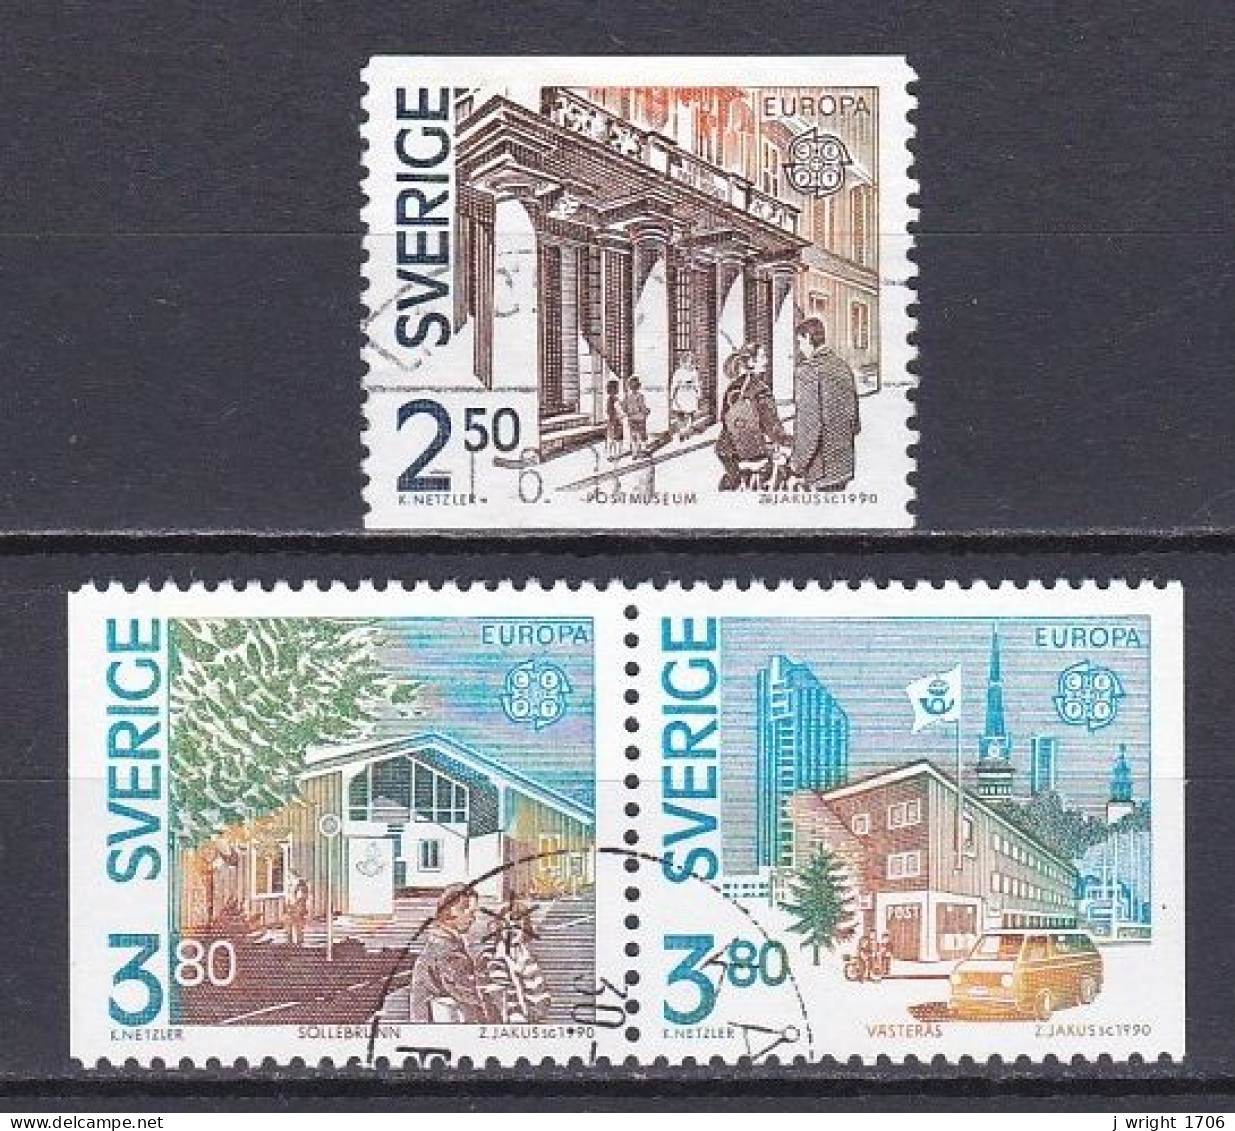 Sweden, 1990, Europa CEPT, Set, USED - Used Stamps